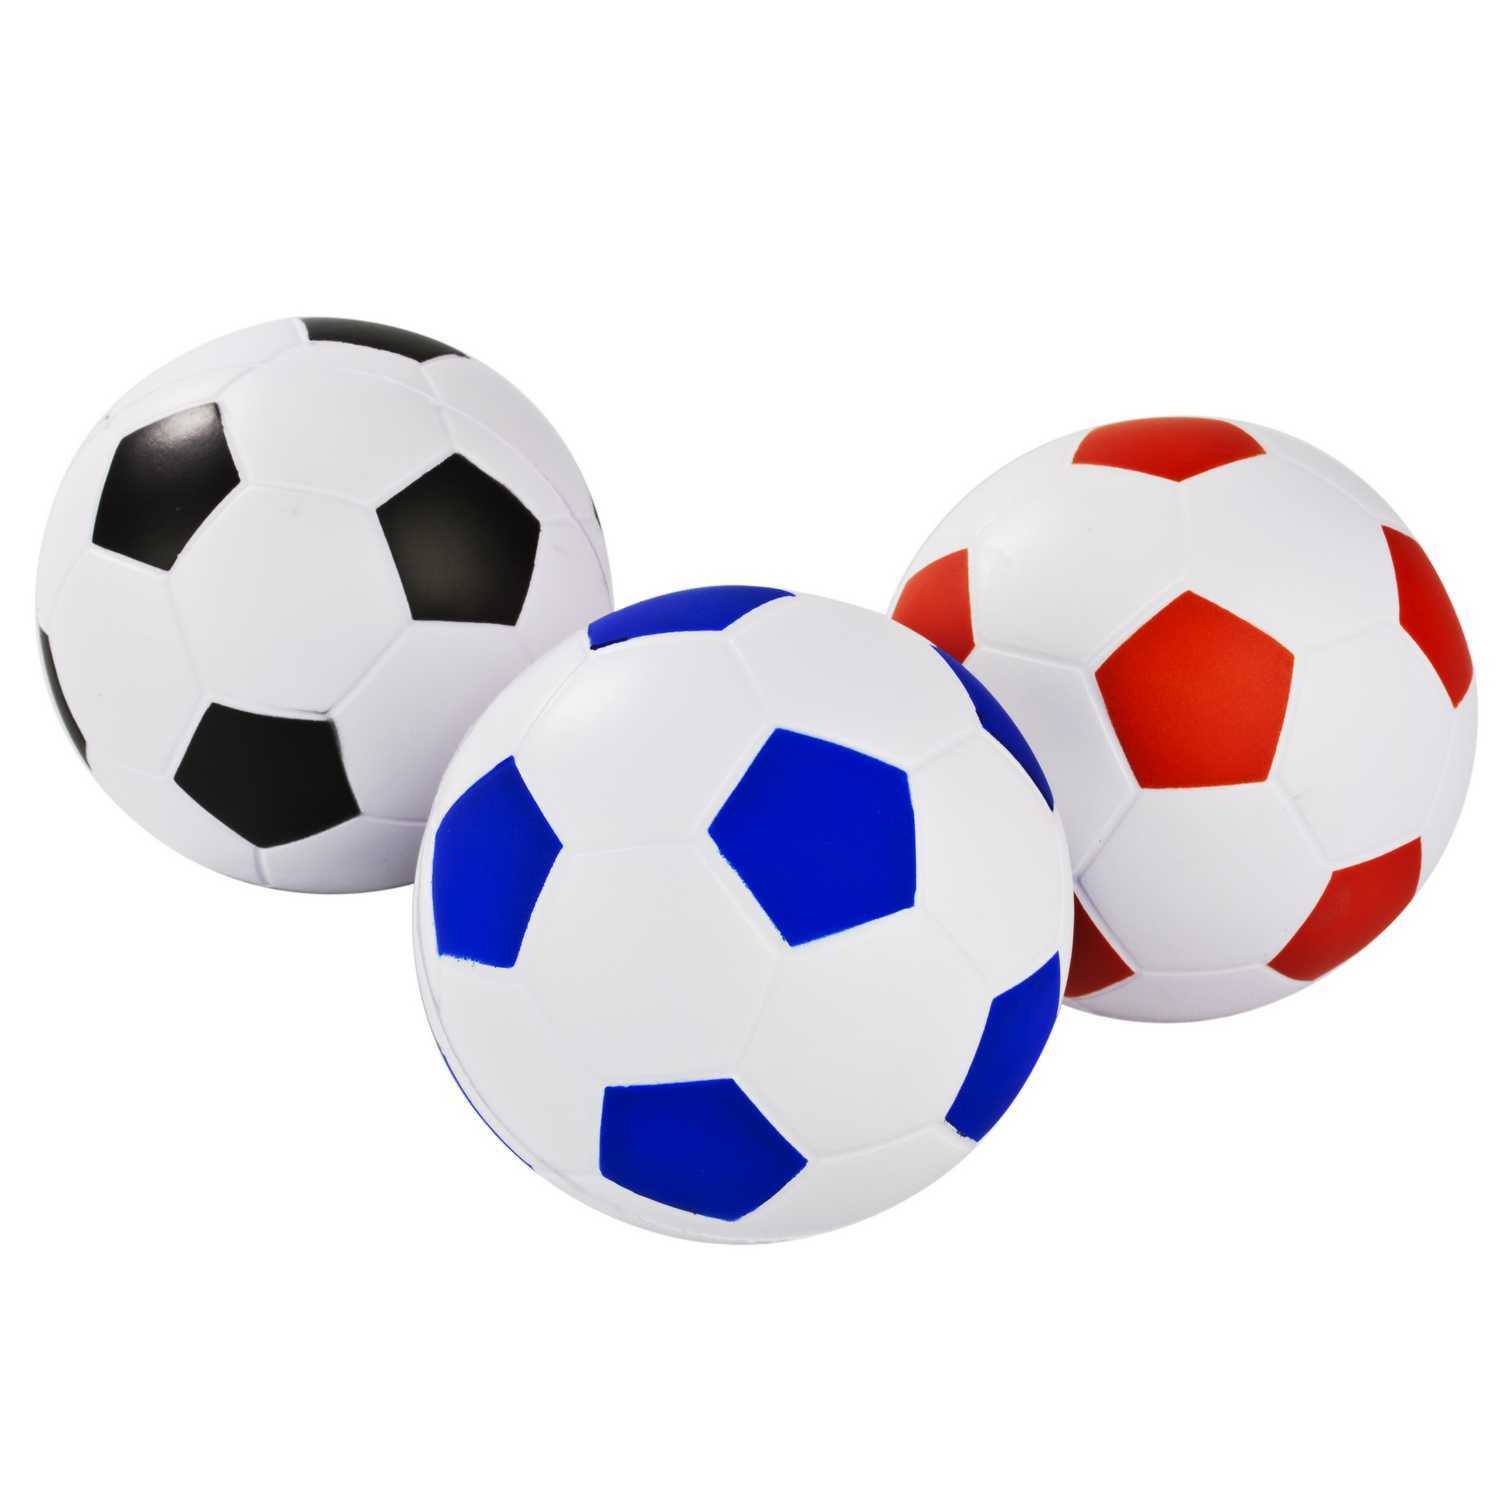 Single M.Y Football 20cm in Assorted styles Image 1